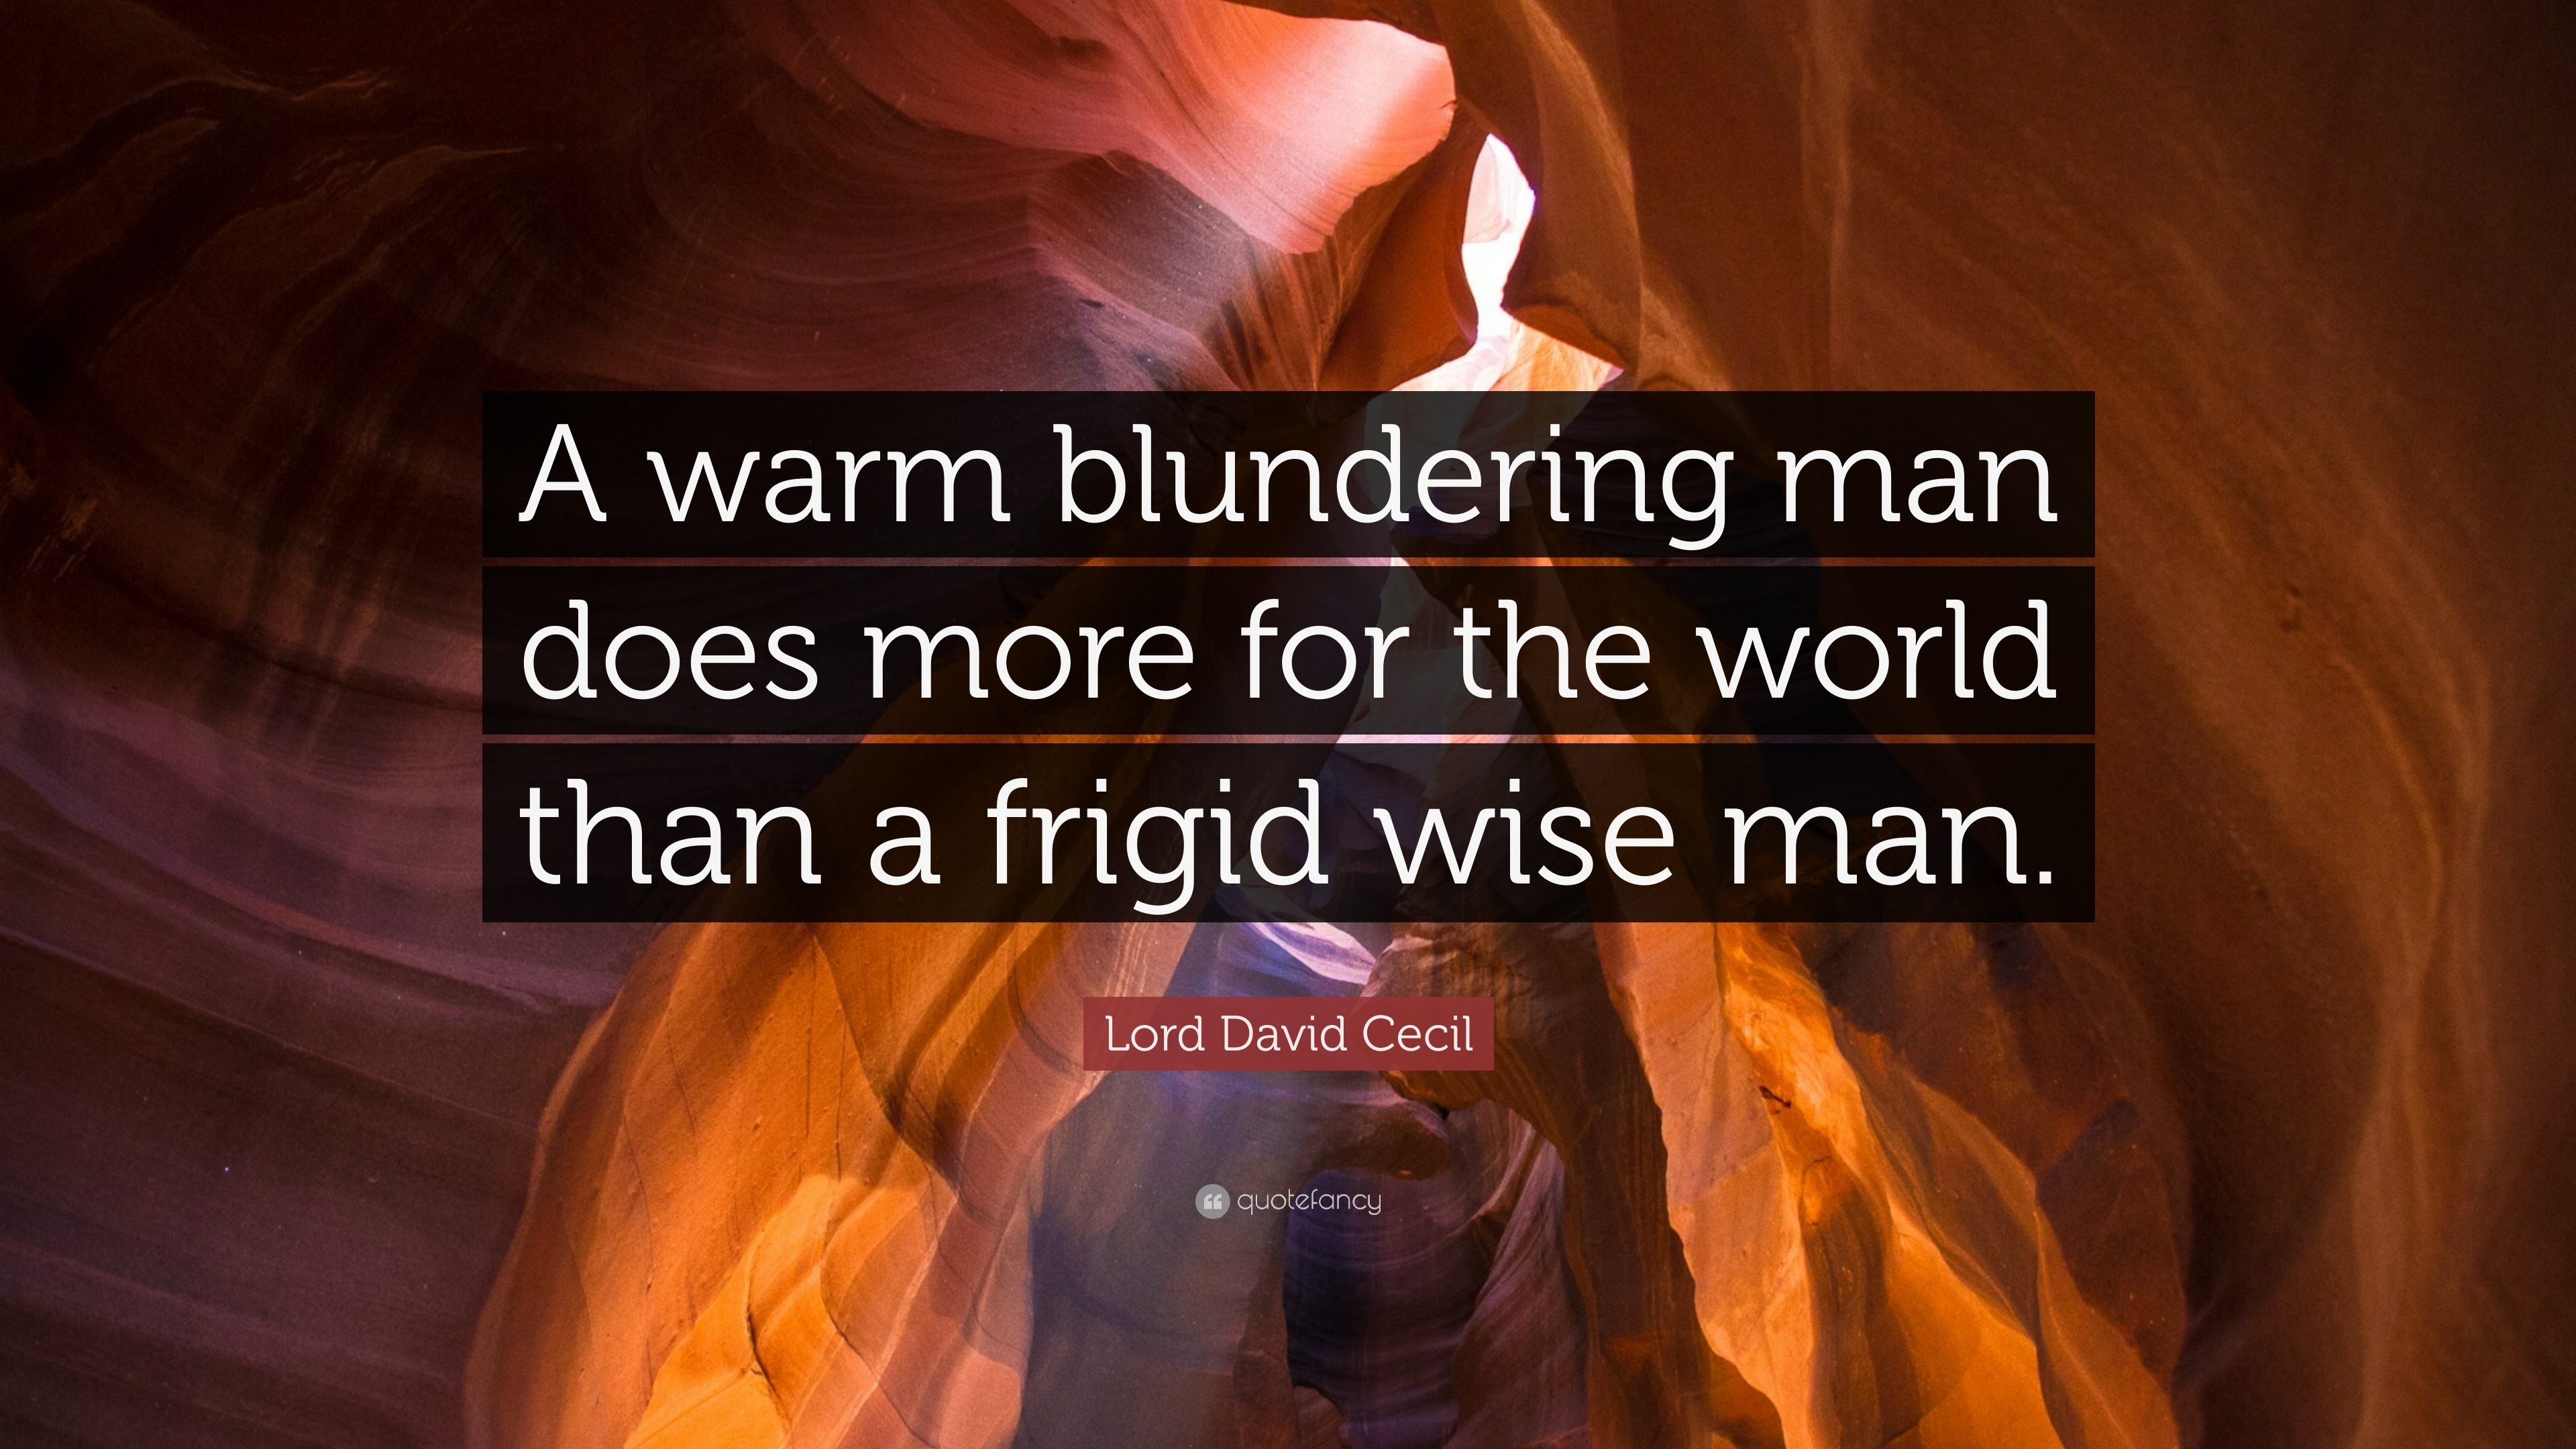 Lord David Cecil Quote: “A warm blundering man does more for the world than  a frigid